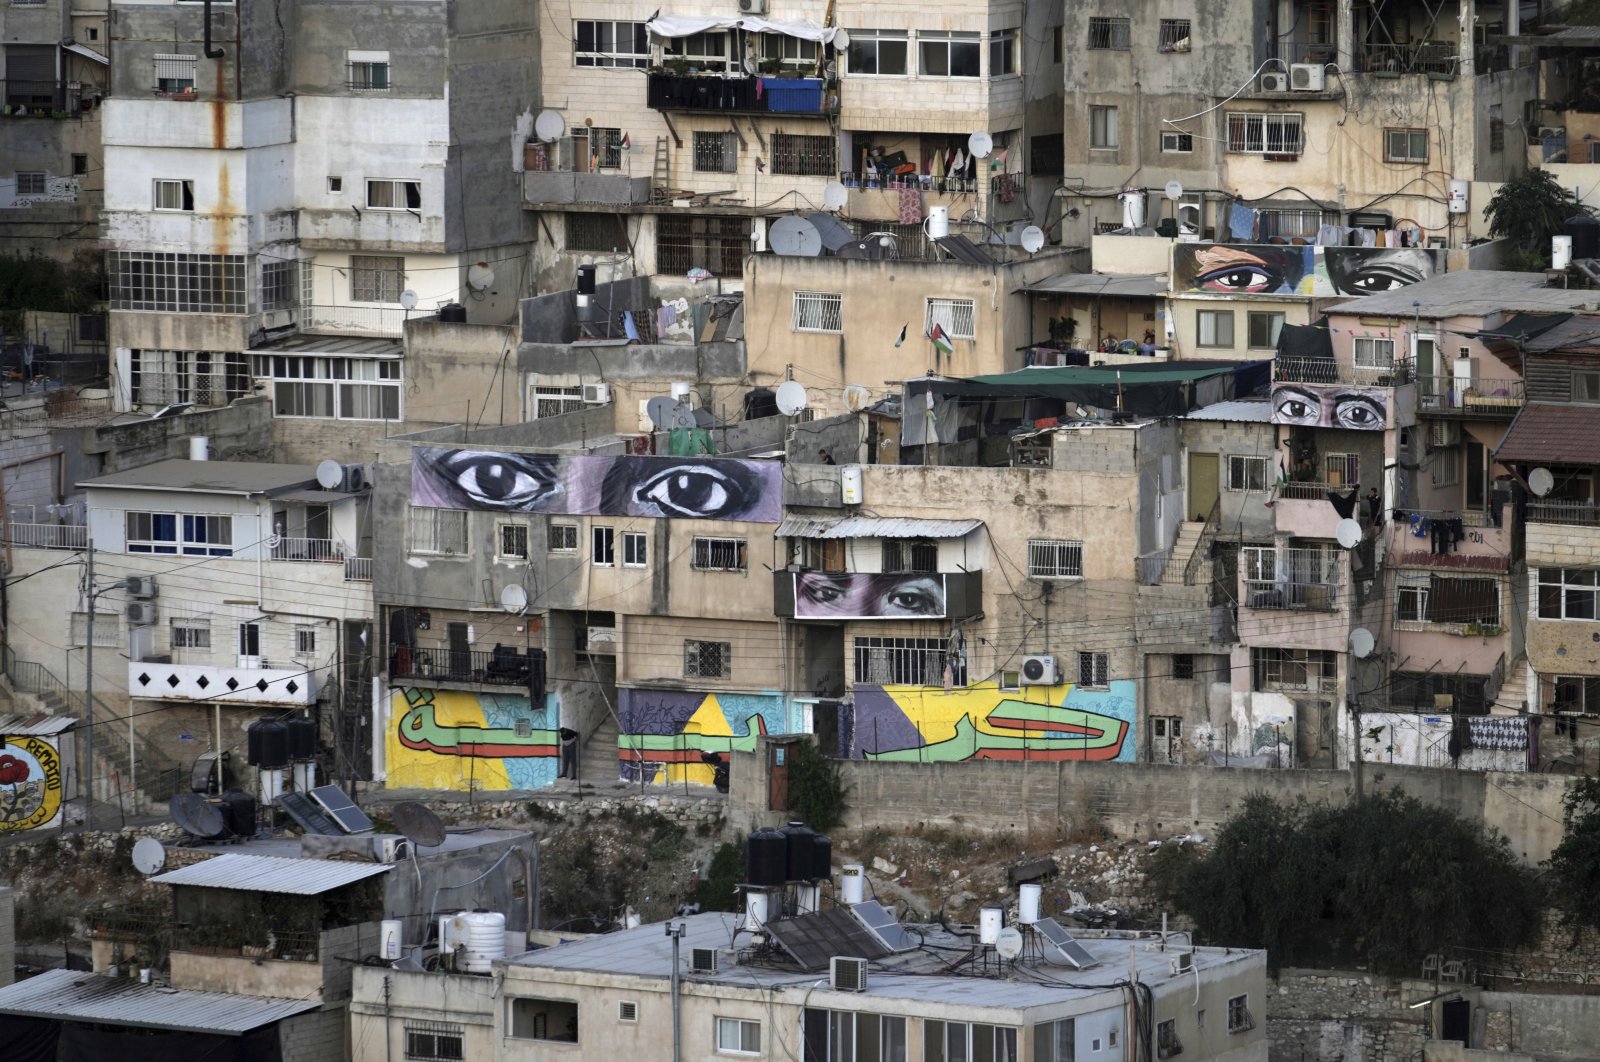 Murals that are part of the public art project &quot;I Witness Silwan,&quot; depicting the eyes of local and international figures, including George Floyd, a black American killed by police, top right, in the Silwan neighborhood of Israeli-occupied East Jerusalem, Palestine, Aug. 26, 2022. (AP Photo)